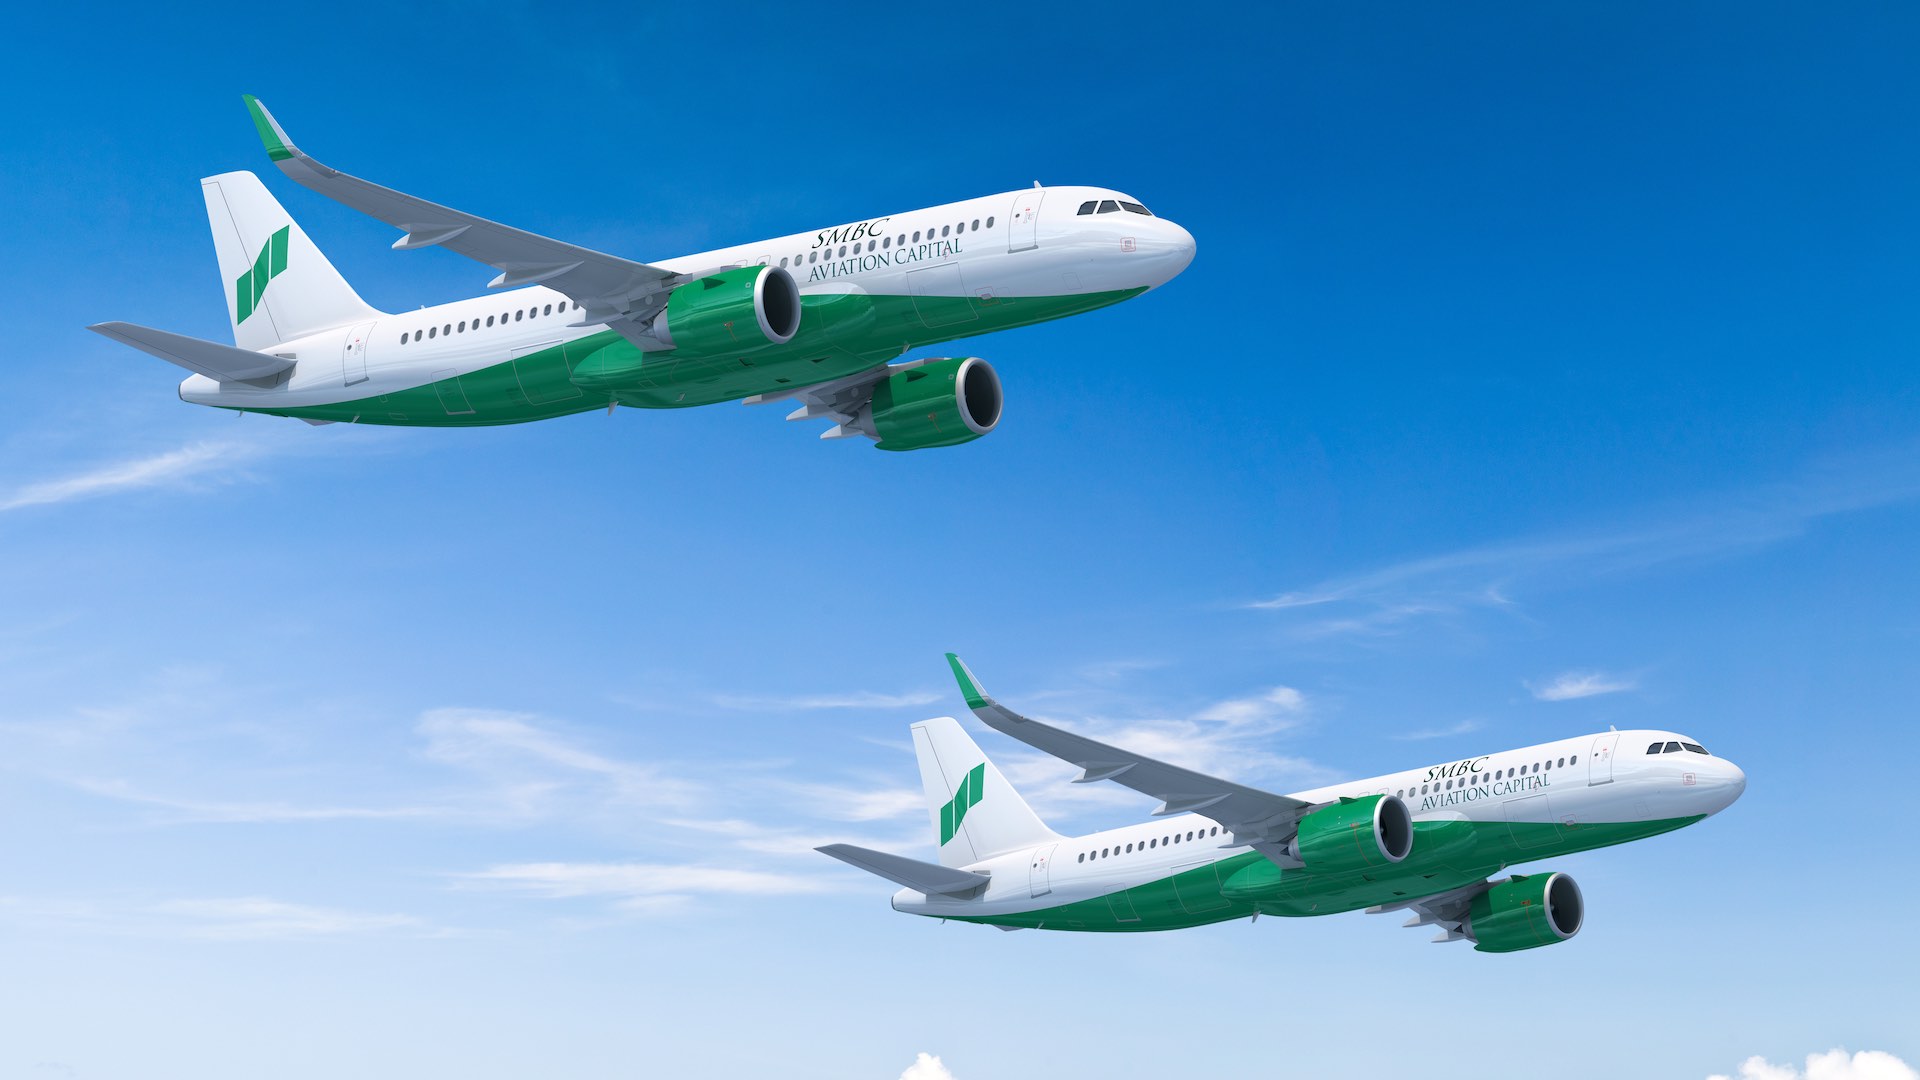 SMBC Aviation Capital's bold $3.4 billion investment in Airbus A320neo fleet